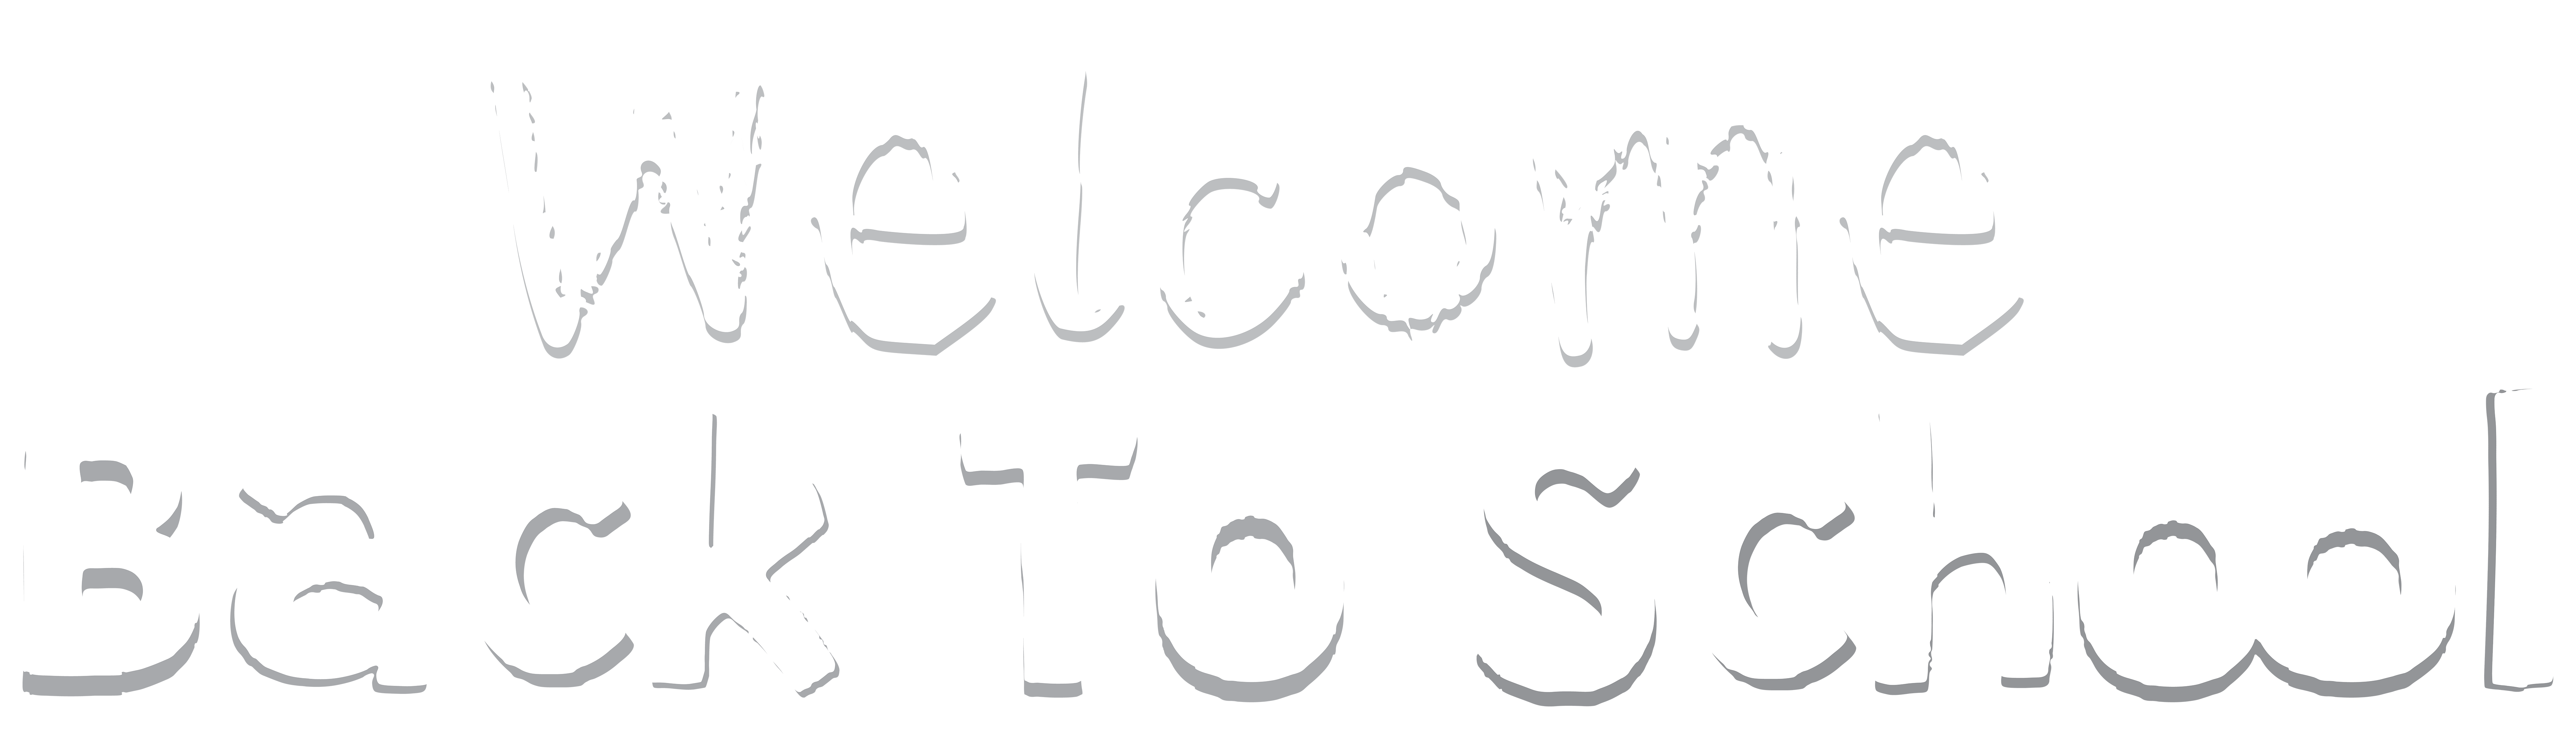 Welcome Back To School Png Clipart Gallery Yopriceville High Quality Images And Transparent Png Free Clipart